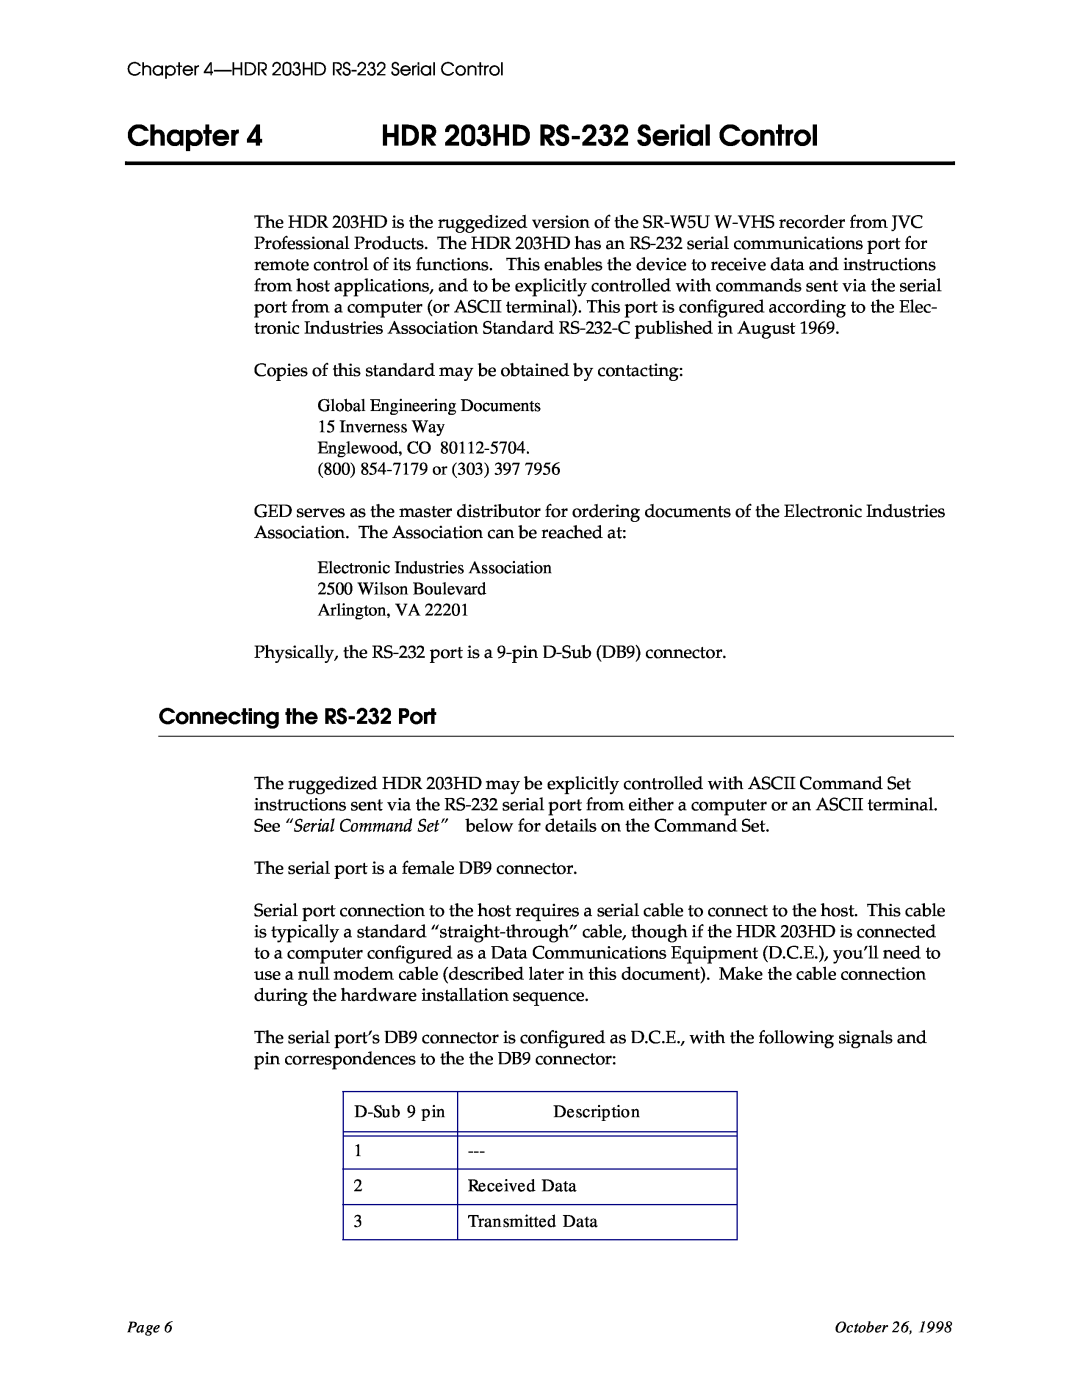 RGB Spectrum user manual HDR 203HD RS-232 Serial Control, Connecting the RS-232 Port, Chapter 